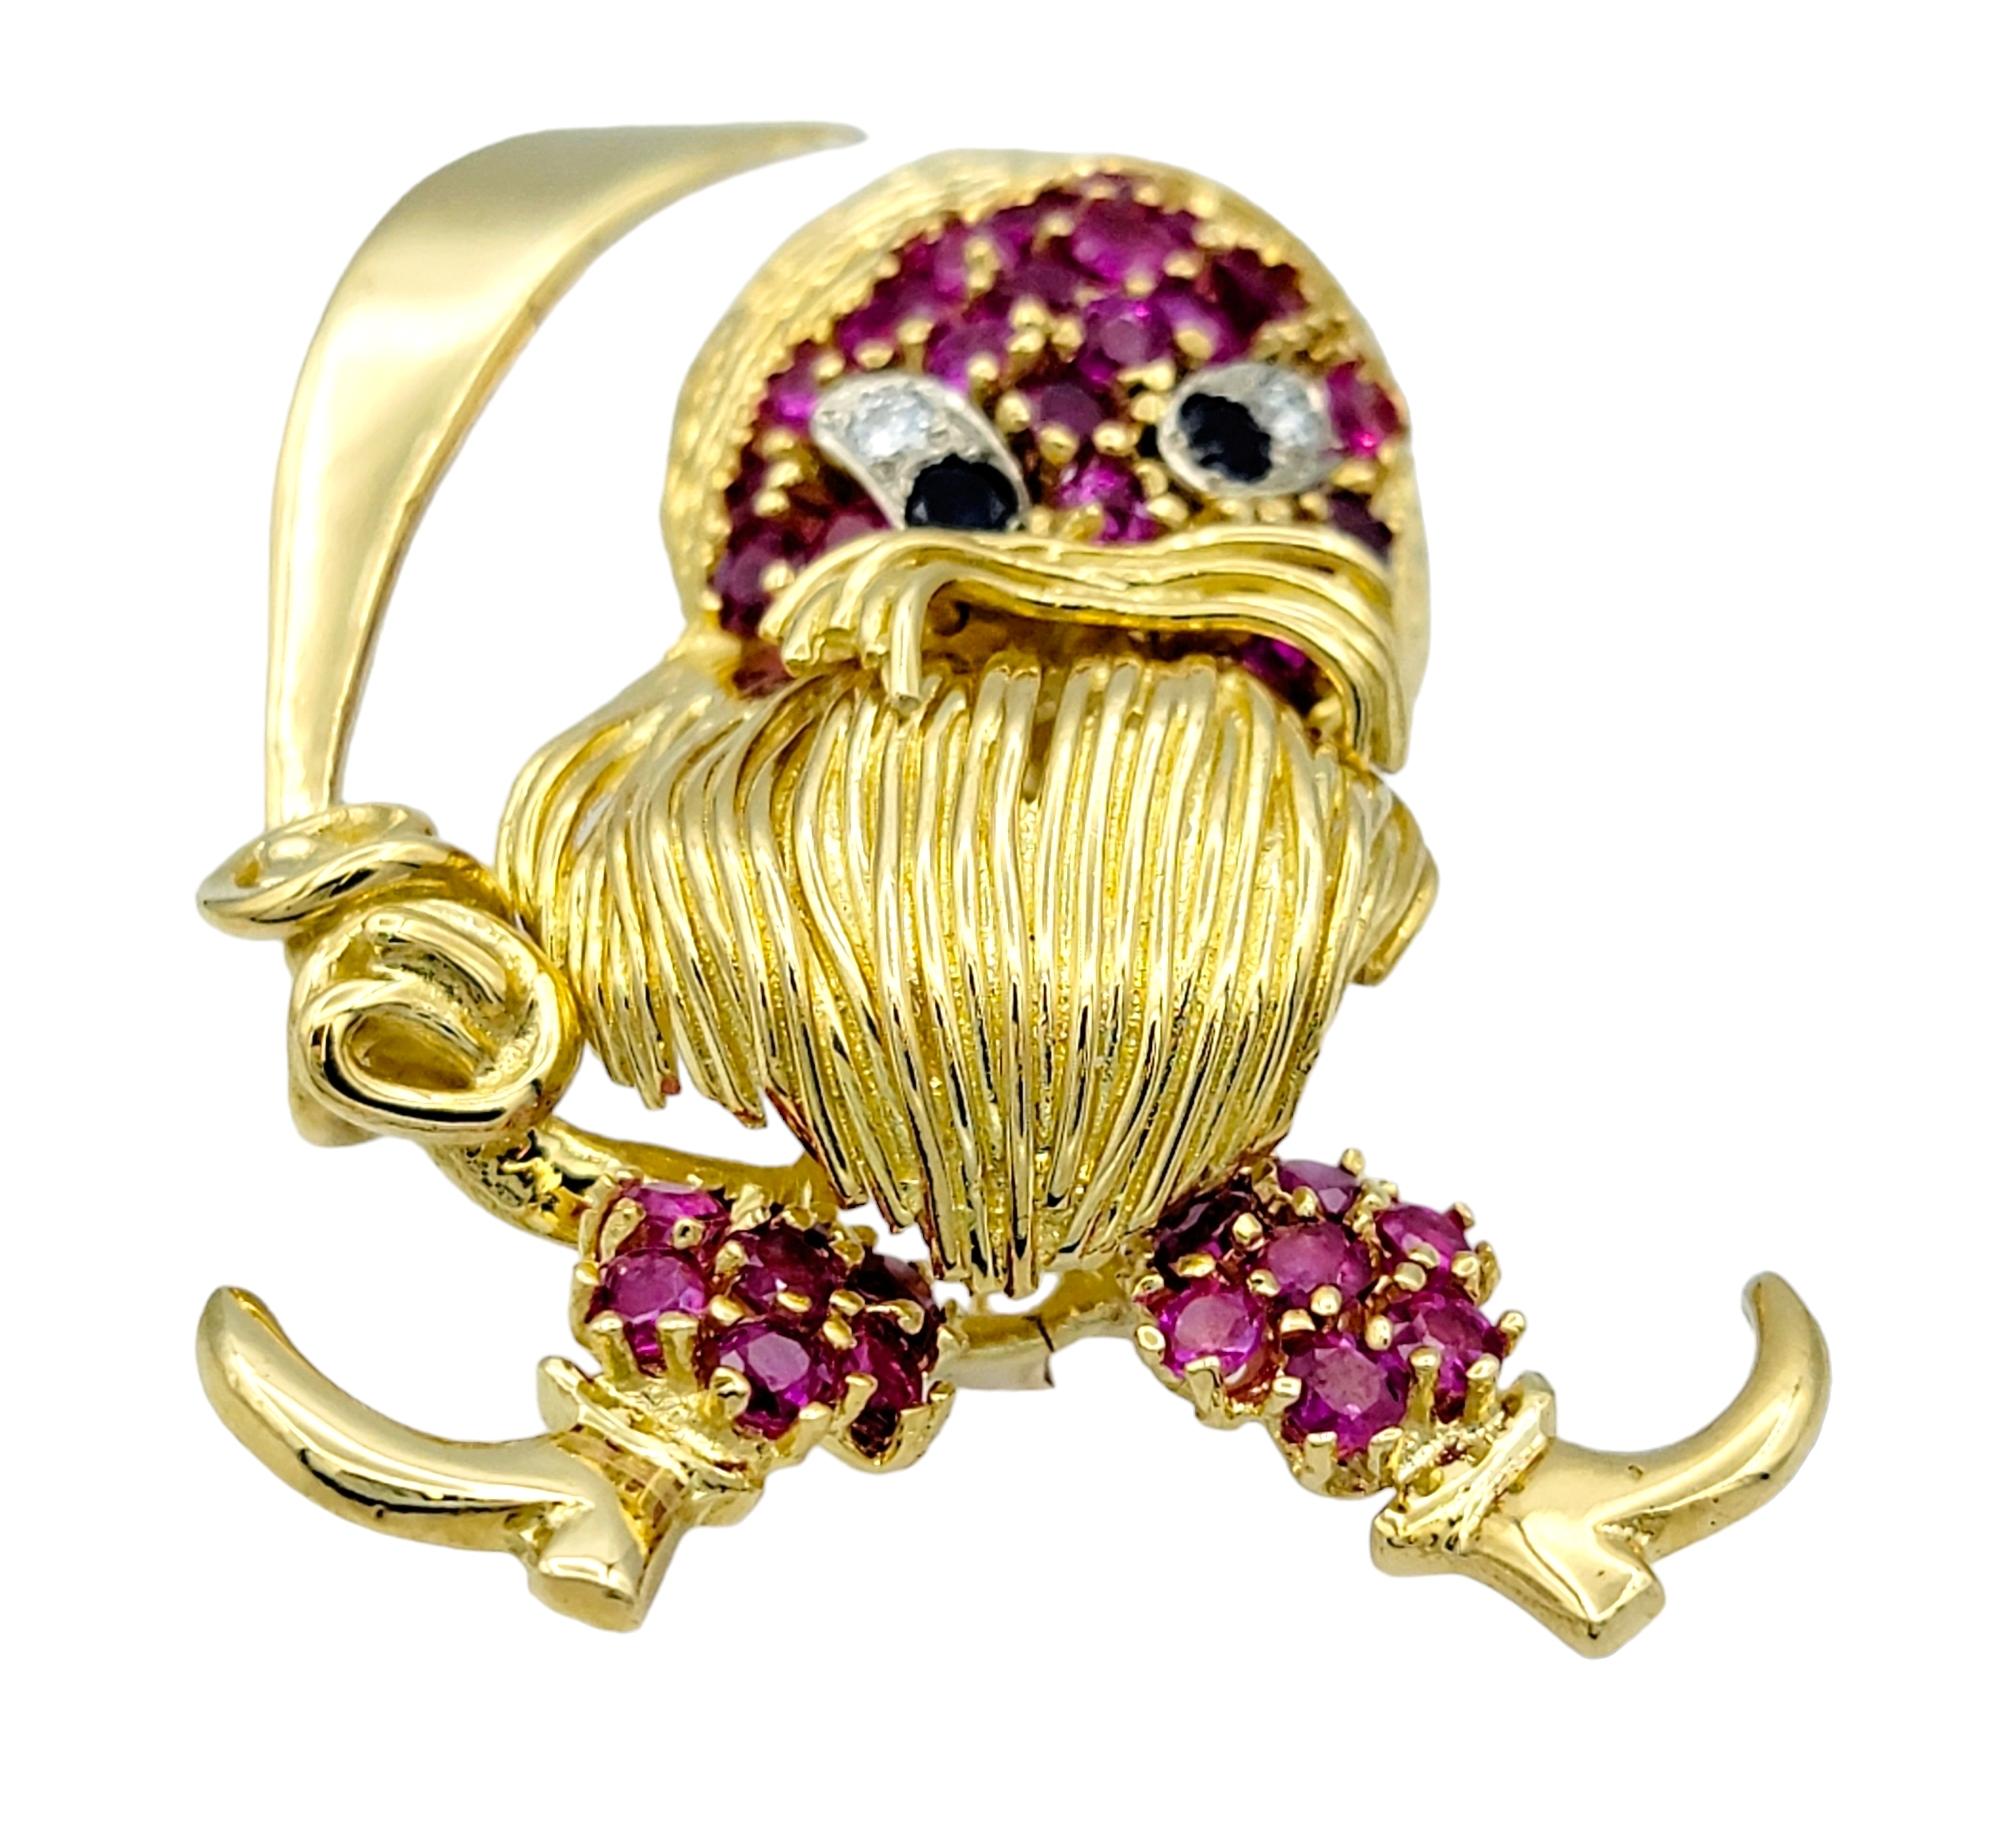 This whimsical brooch is a true embodiment of artistic imagination and craftsmanship, fashioned in lustrous 18 karat yellow gold. Taking the form of an animated pirate, this piece is a testament to attention to detail and playful design. The